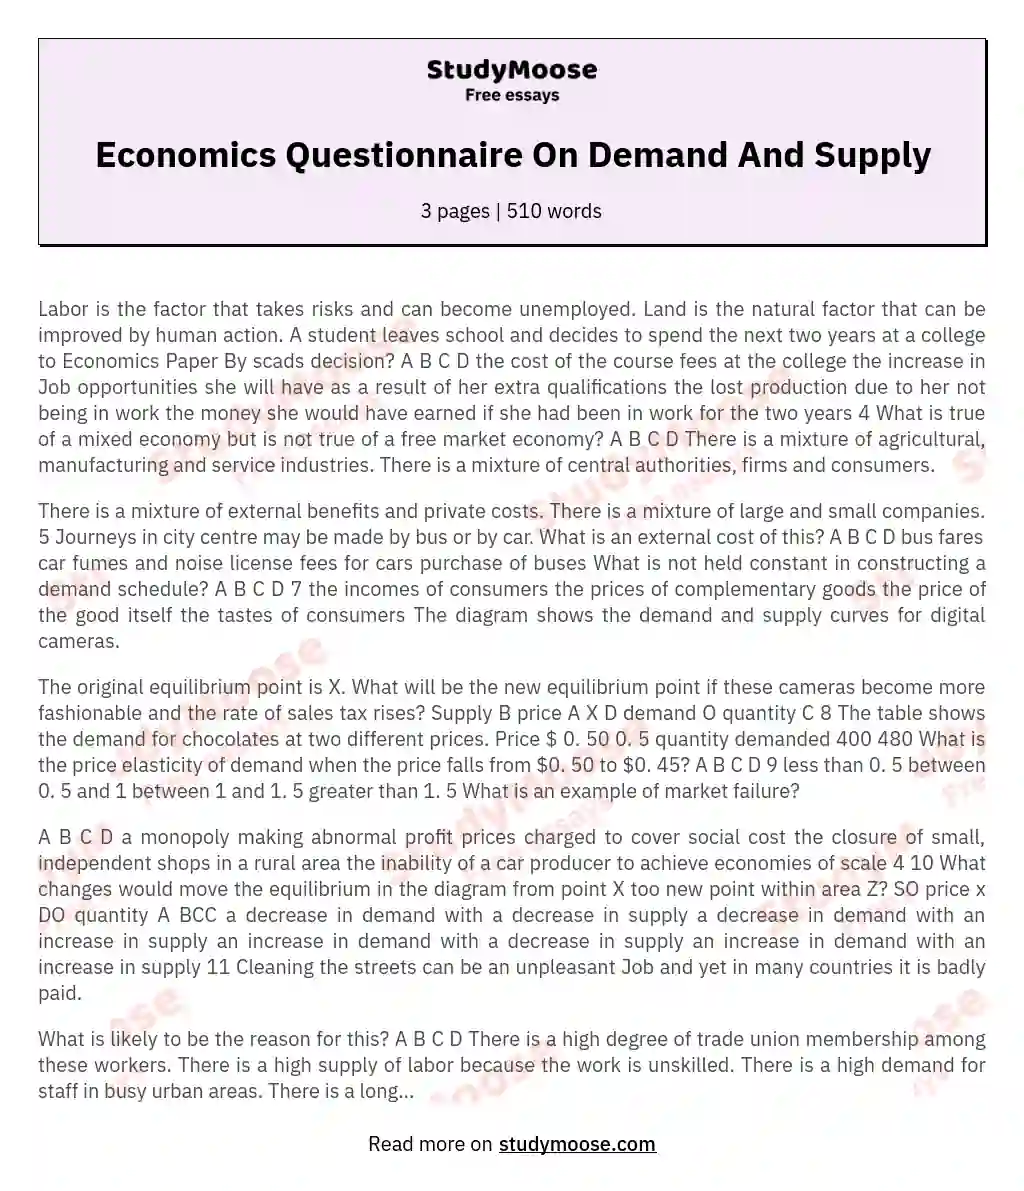 Economics Questionnaire On Demand And Supply essay